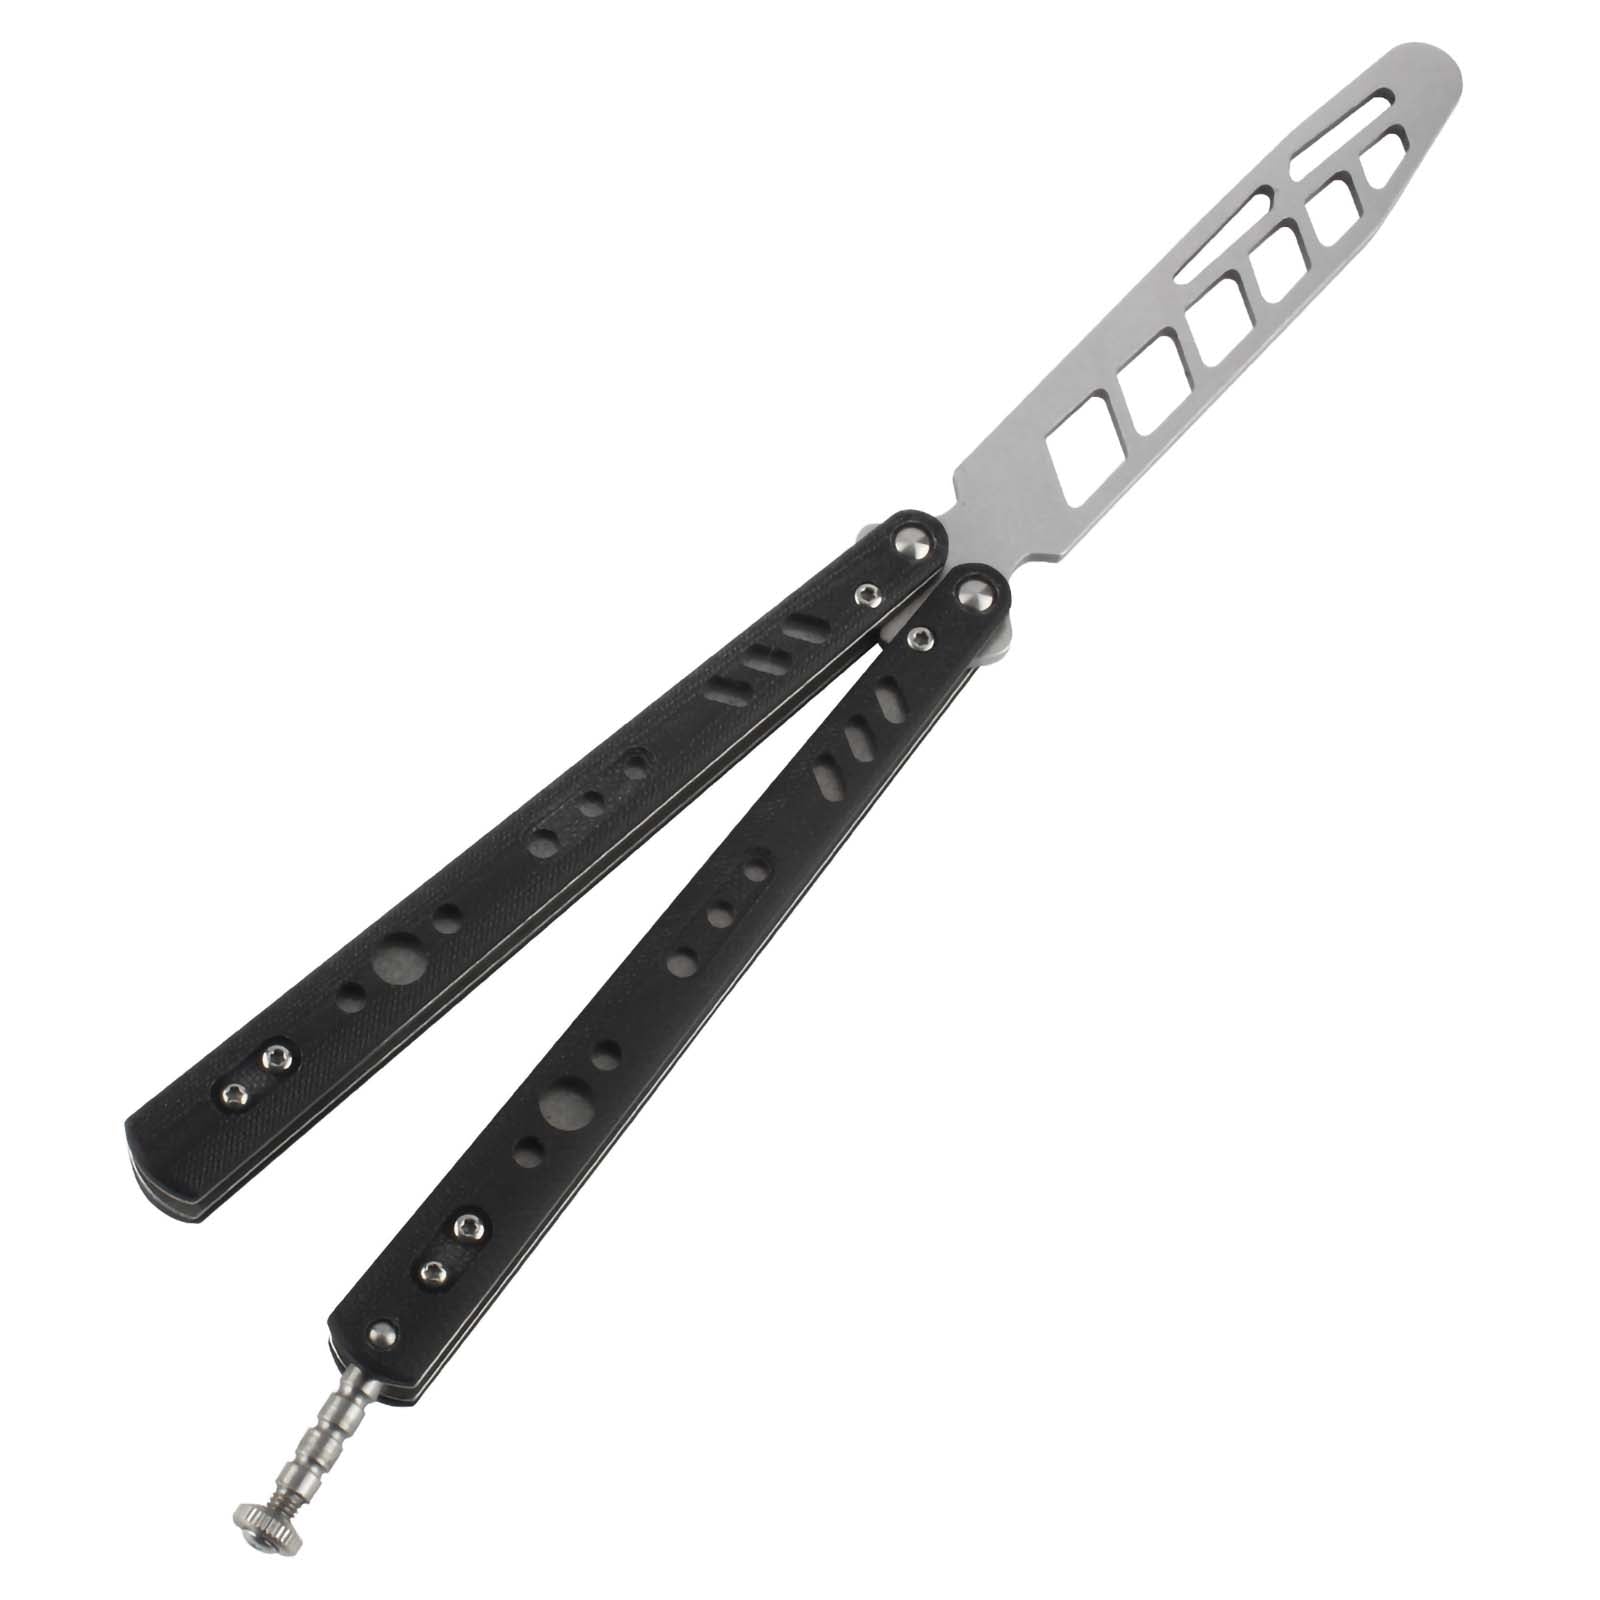 Andux Balisong CS:GO Equipment Black CS/HDD44 (ONLY Available in the United States)